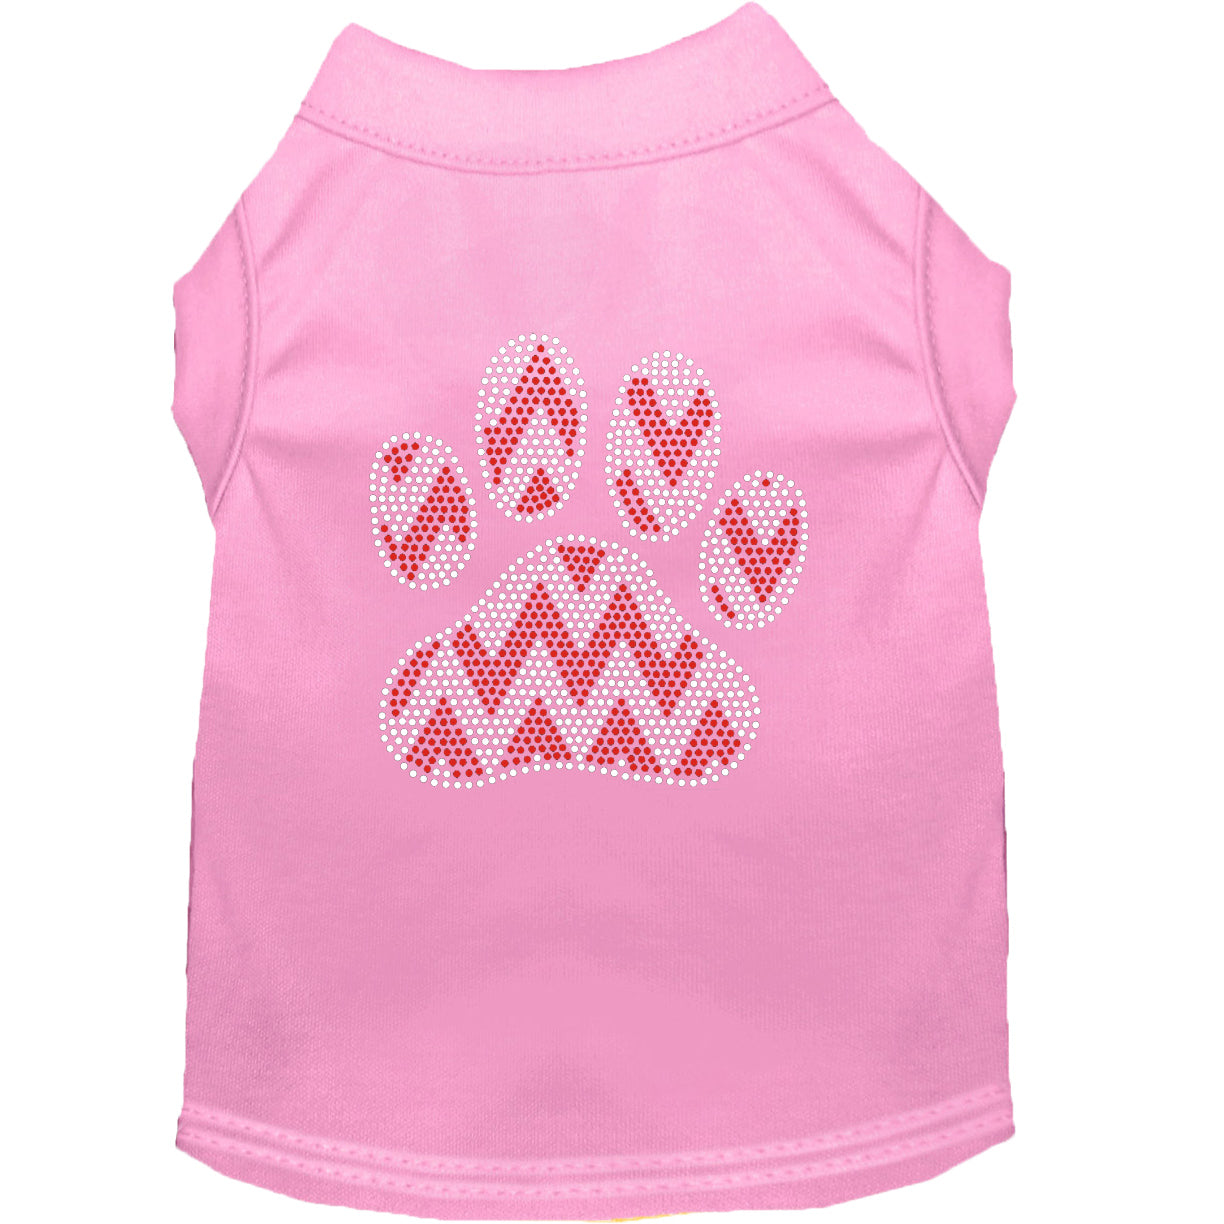 Candy Cane Chevron Paw Rhinestone Shirts for Cats and Dogs